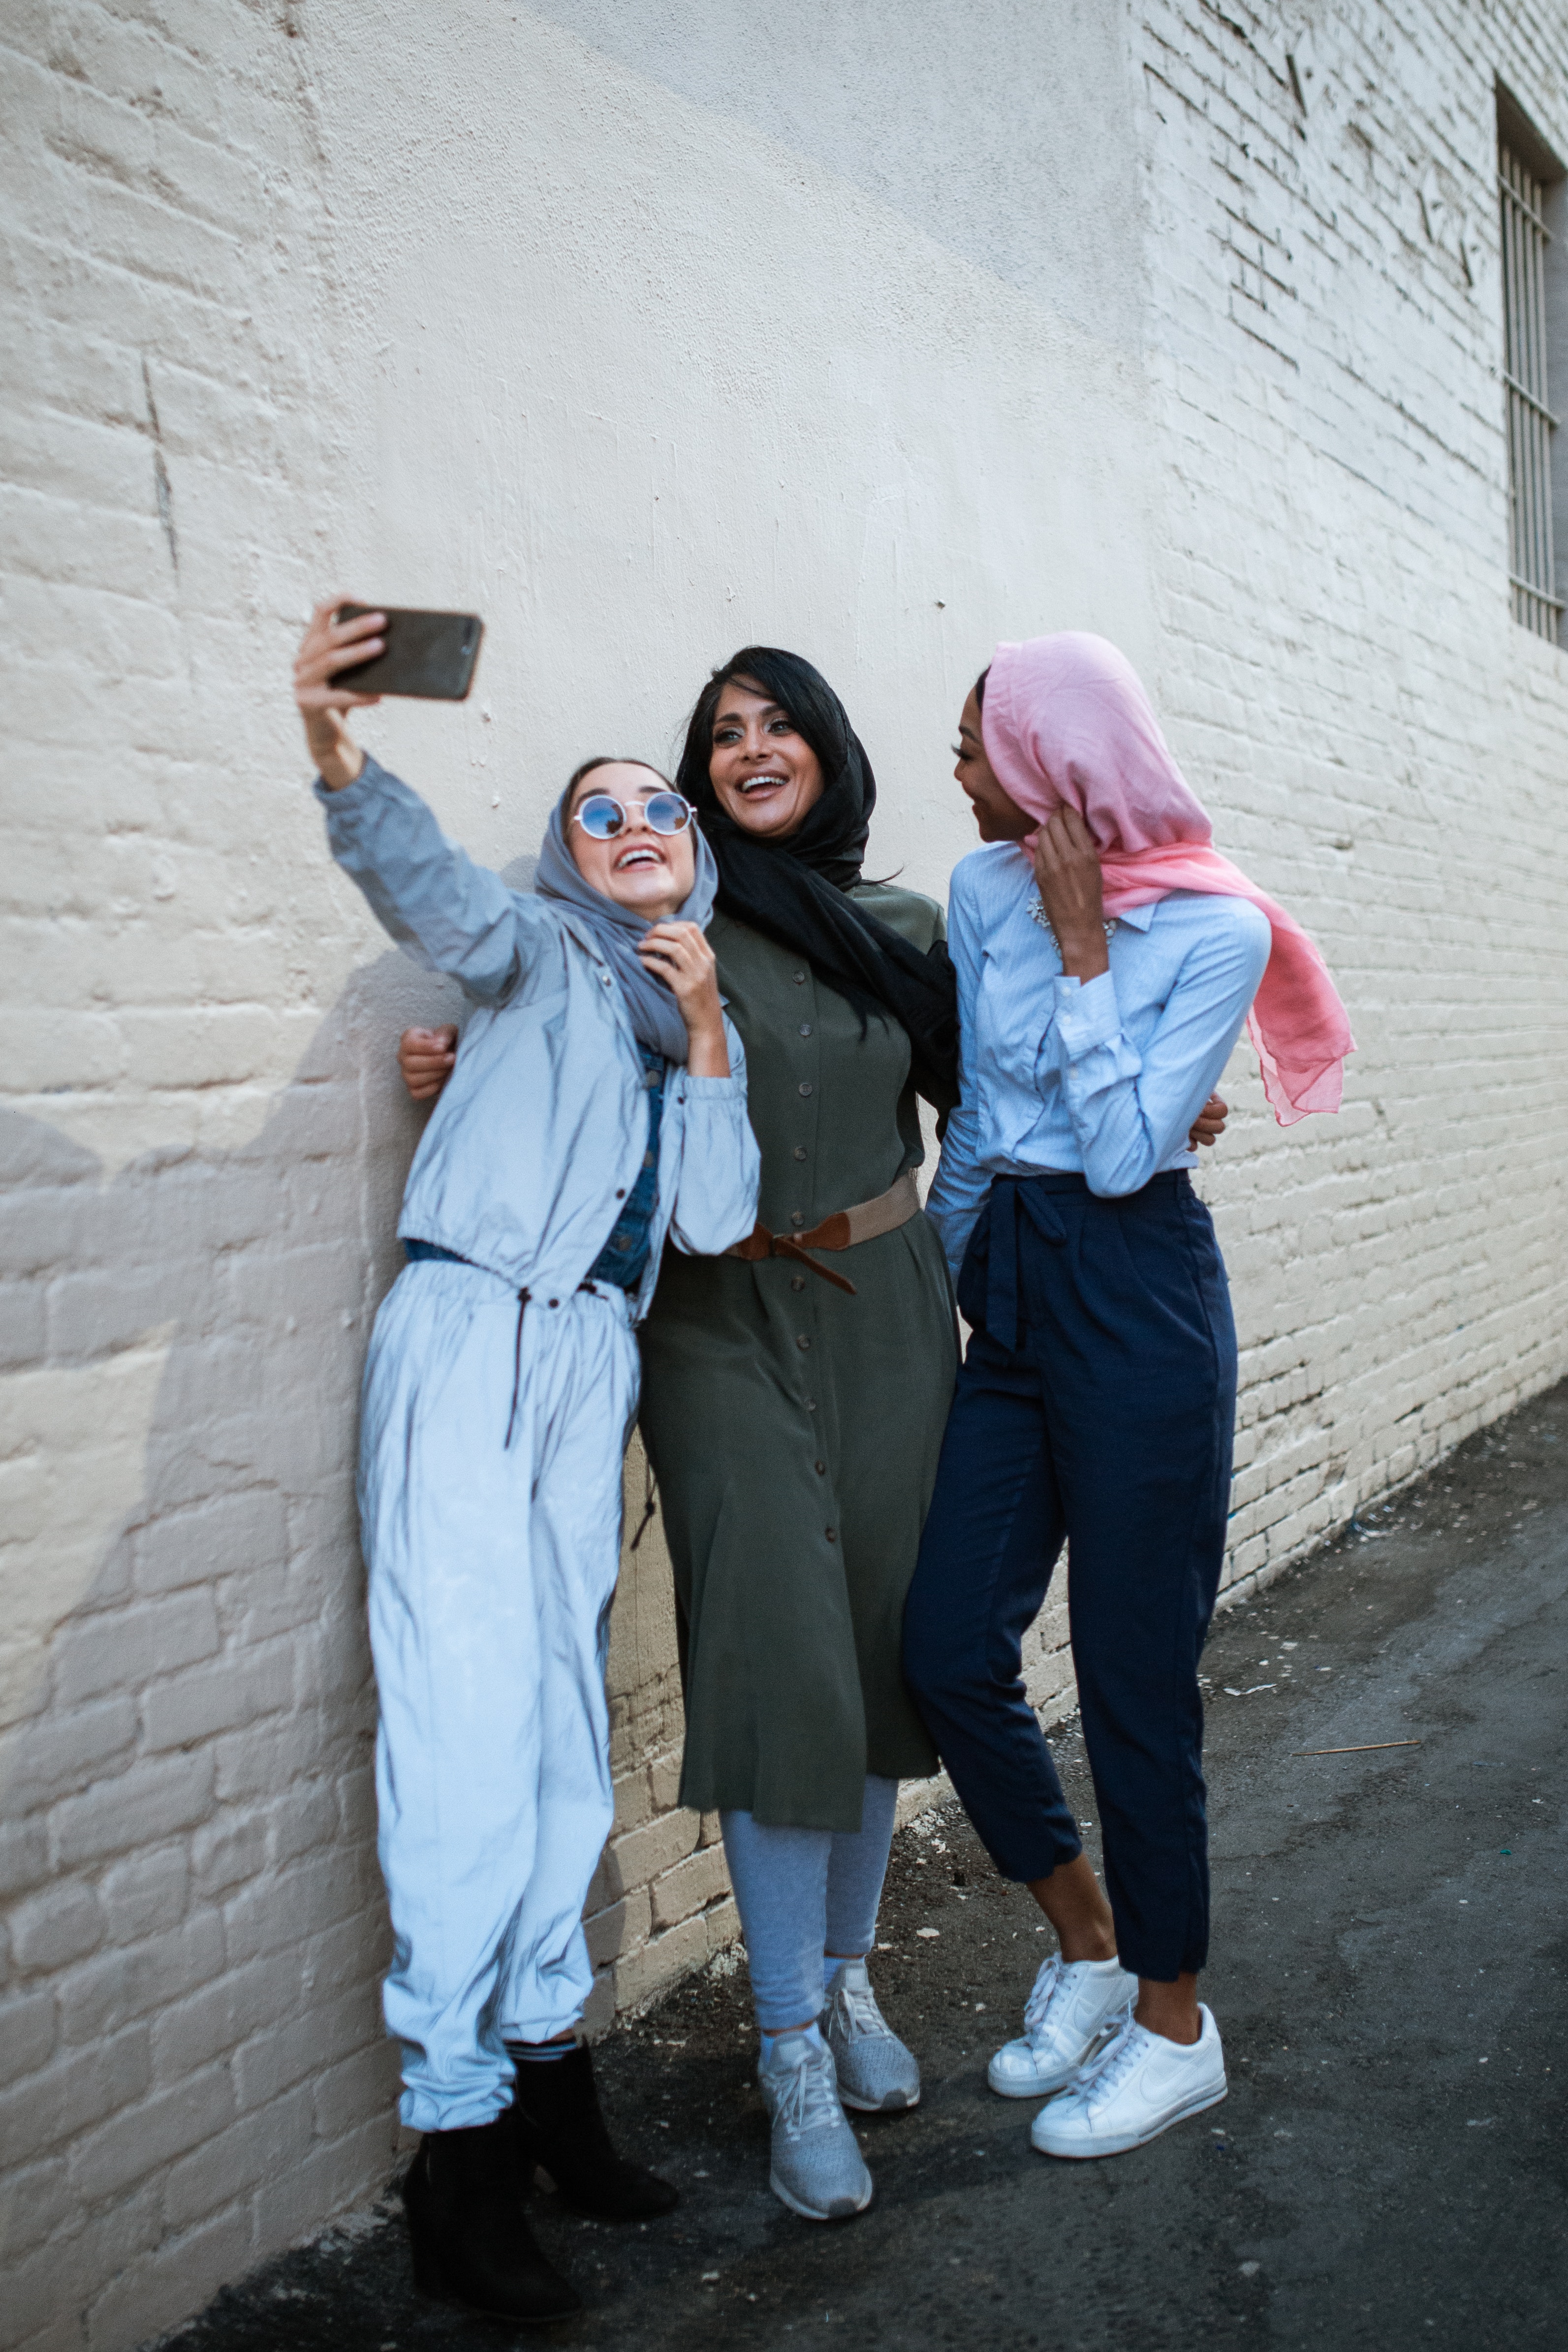 A group of friends taking a selfie together. | Source: Pexels